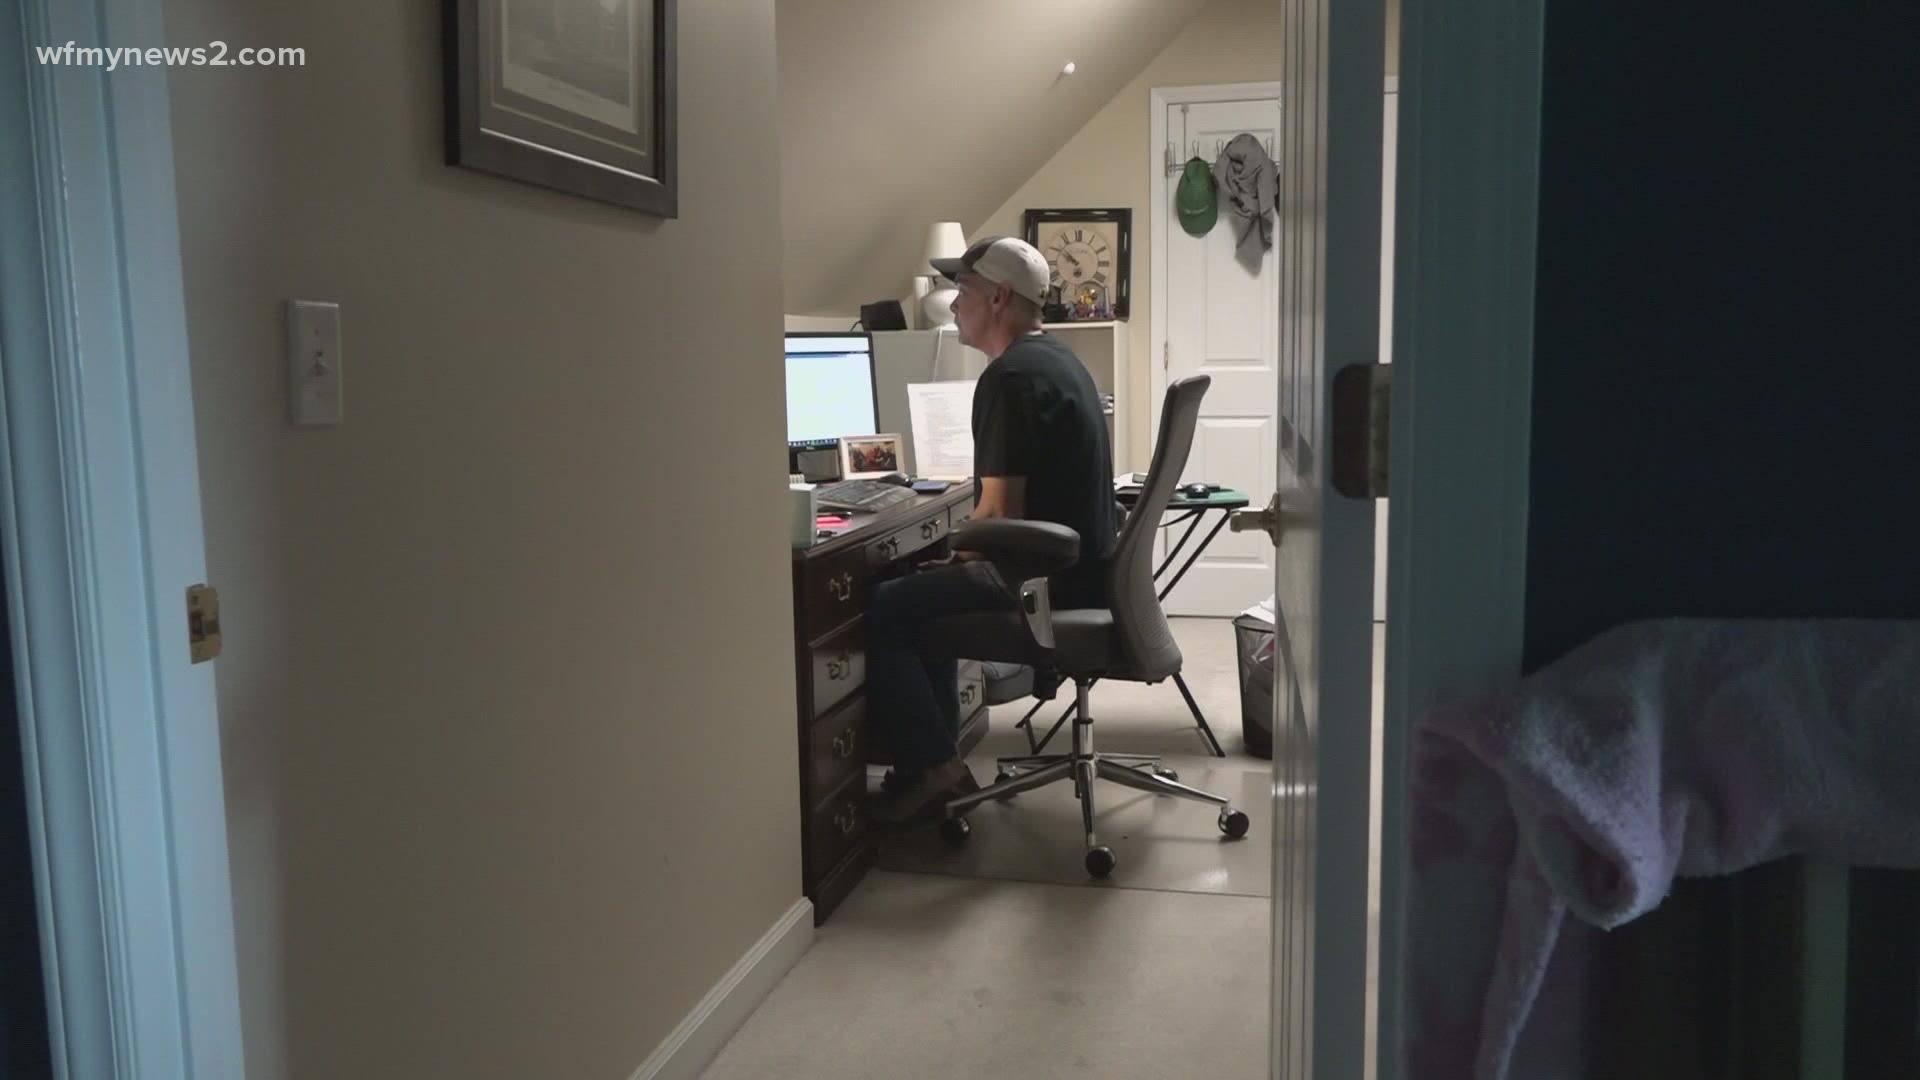 Most of us pay around $100 a month for internet service. The cost to connect is free. Tim Gerringer was told his connection would be a bit more than free.